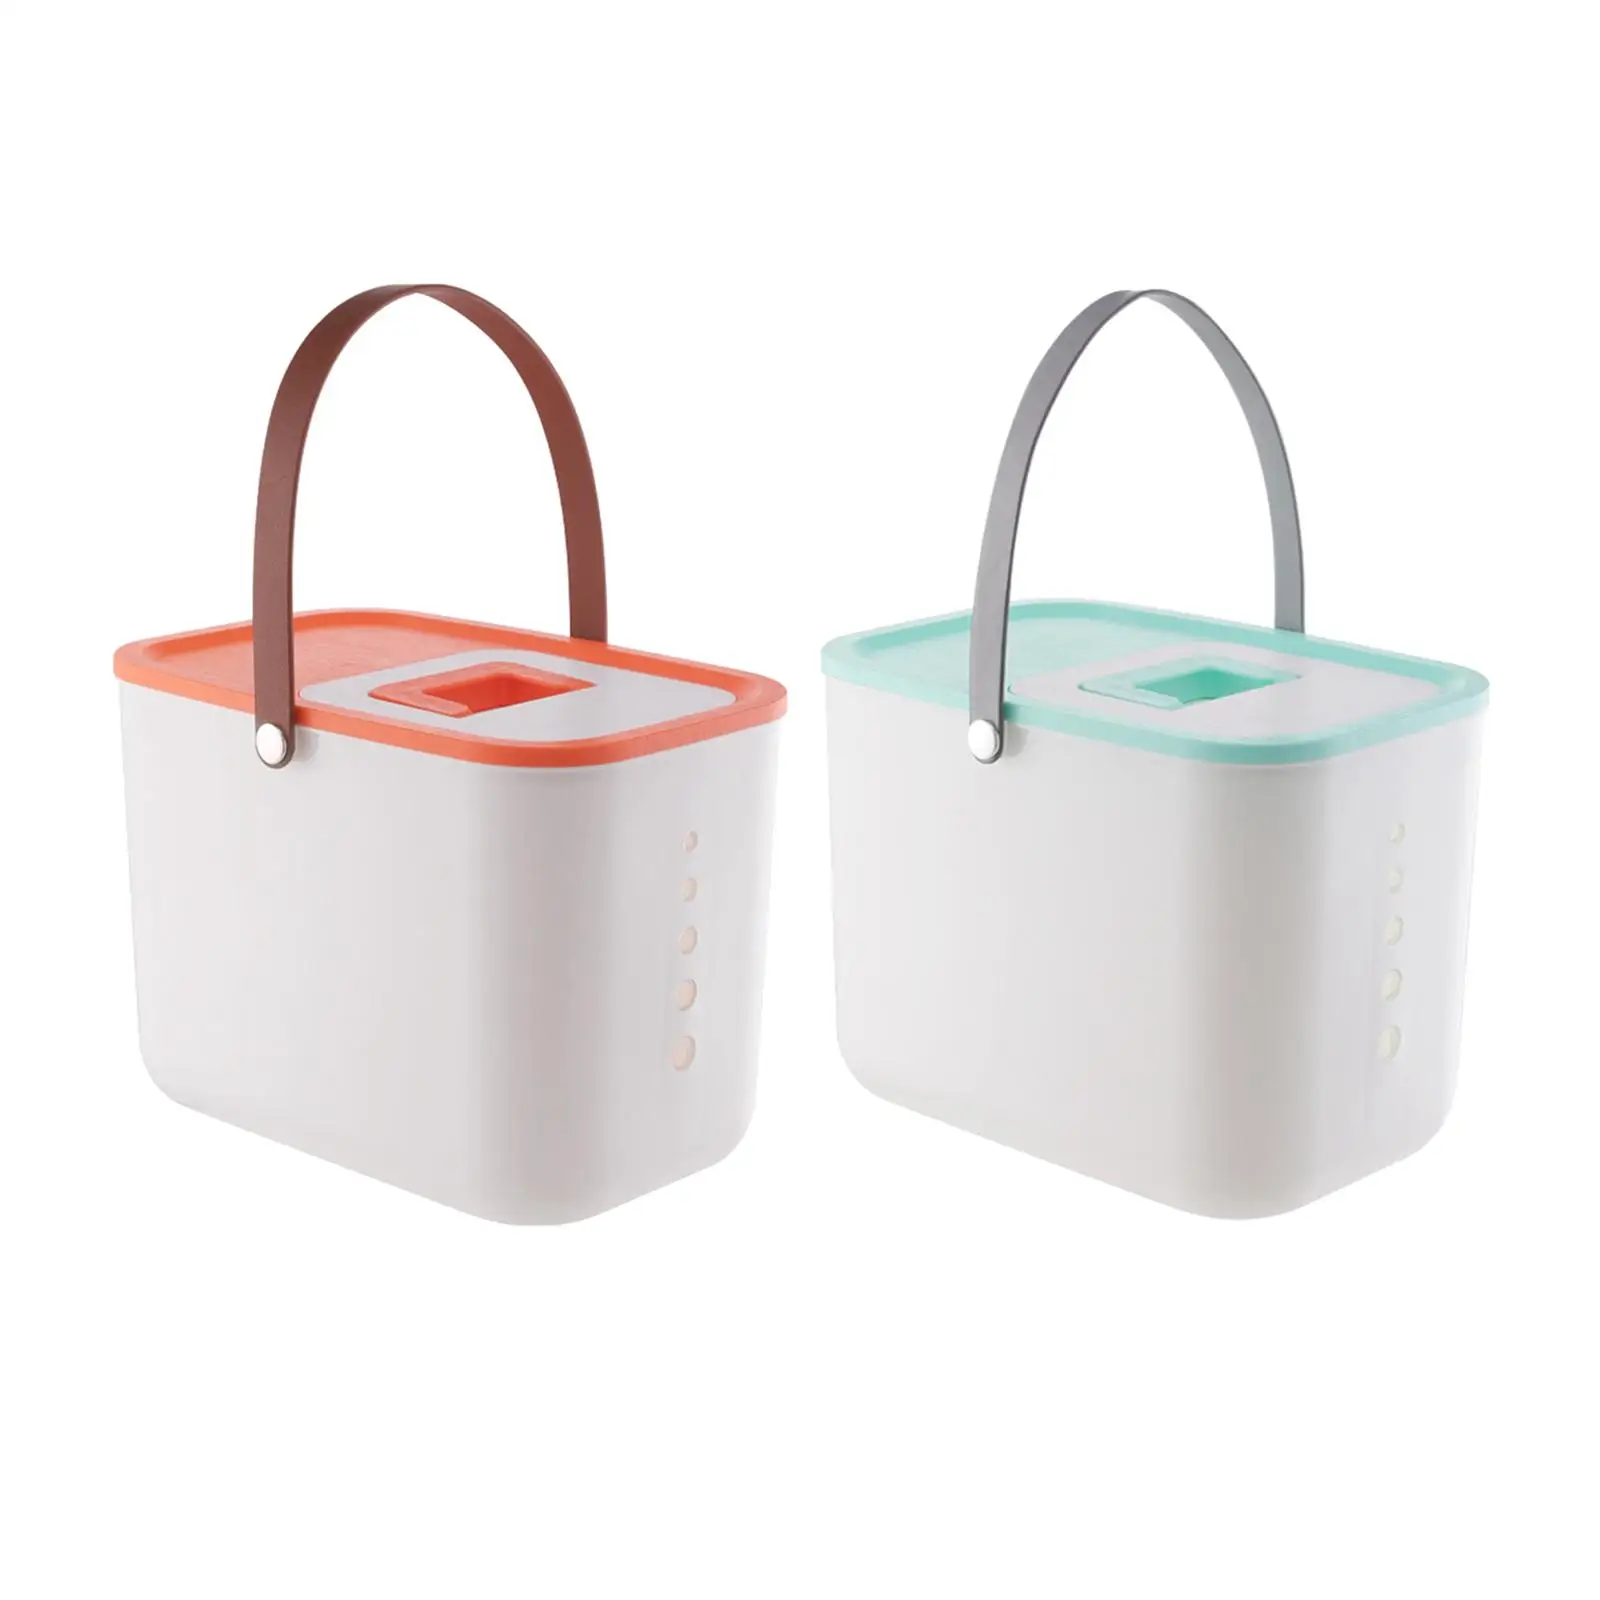 Rice Container Multifunctional Large 25kg with scoop & Handles Cereal Rice Tank Sealed Bucket Bins BPA Free Candy wheat Can